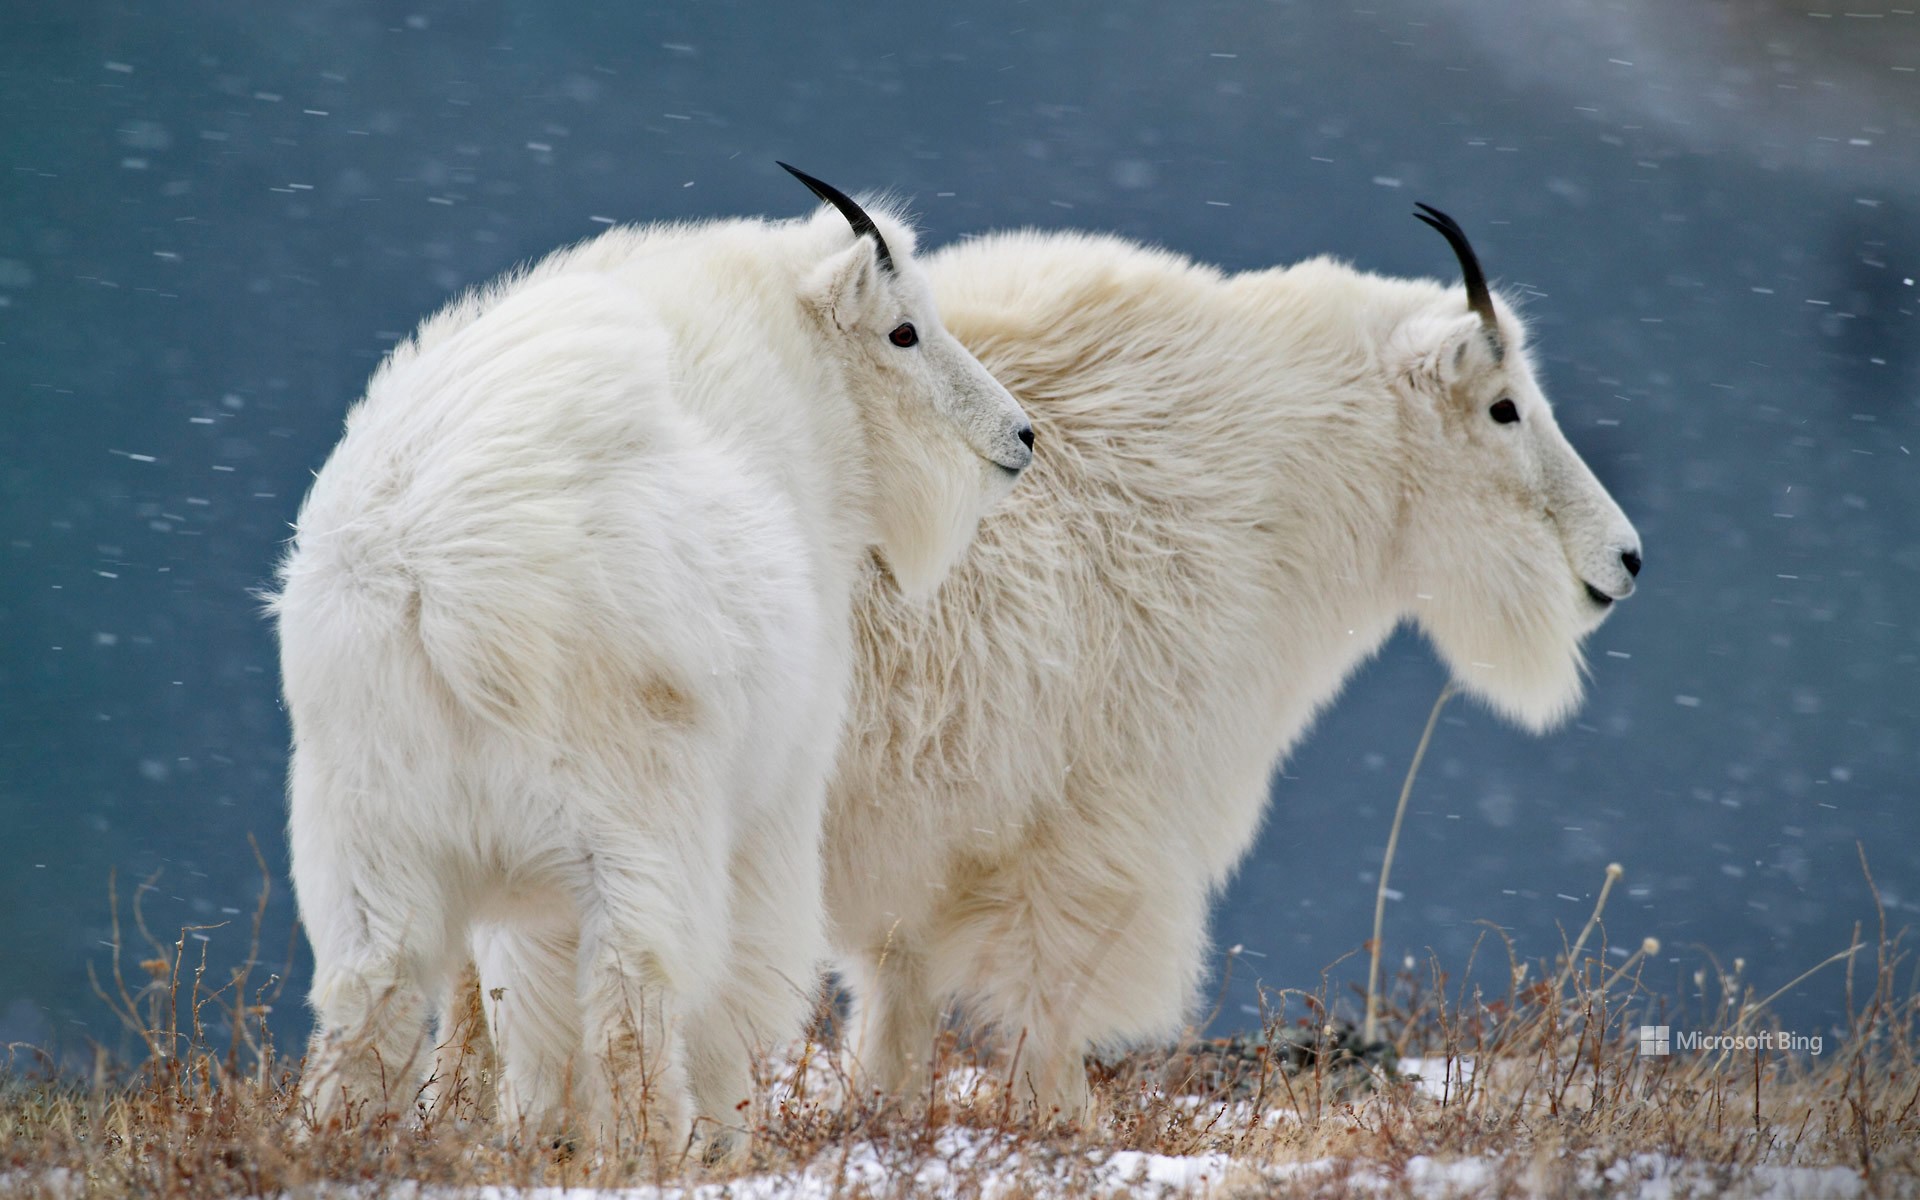 Mountain goats at Glacier National Park in Montana, USA